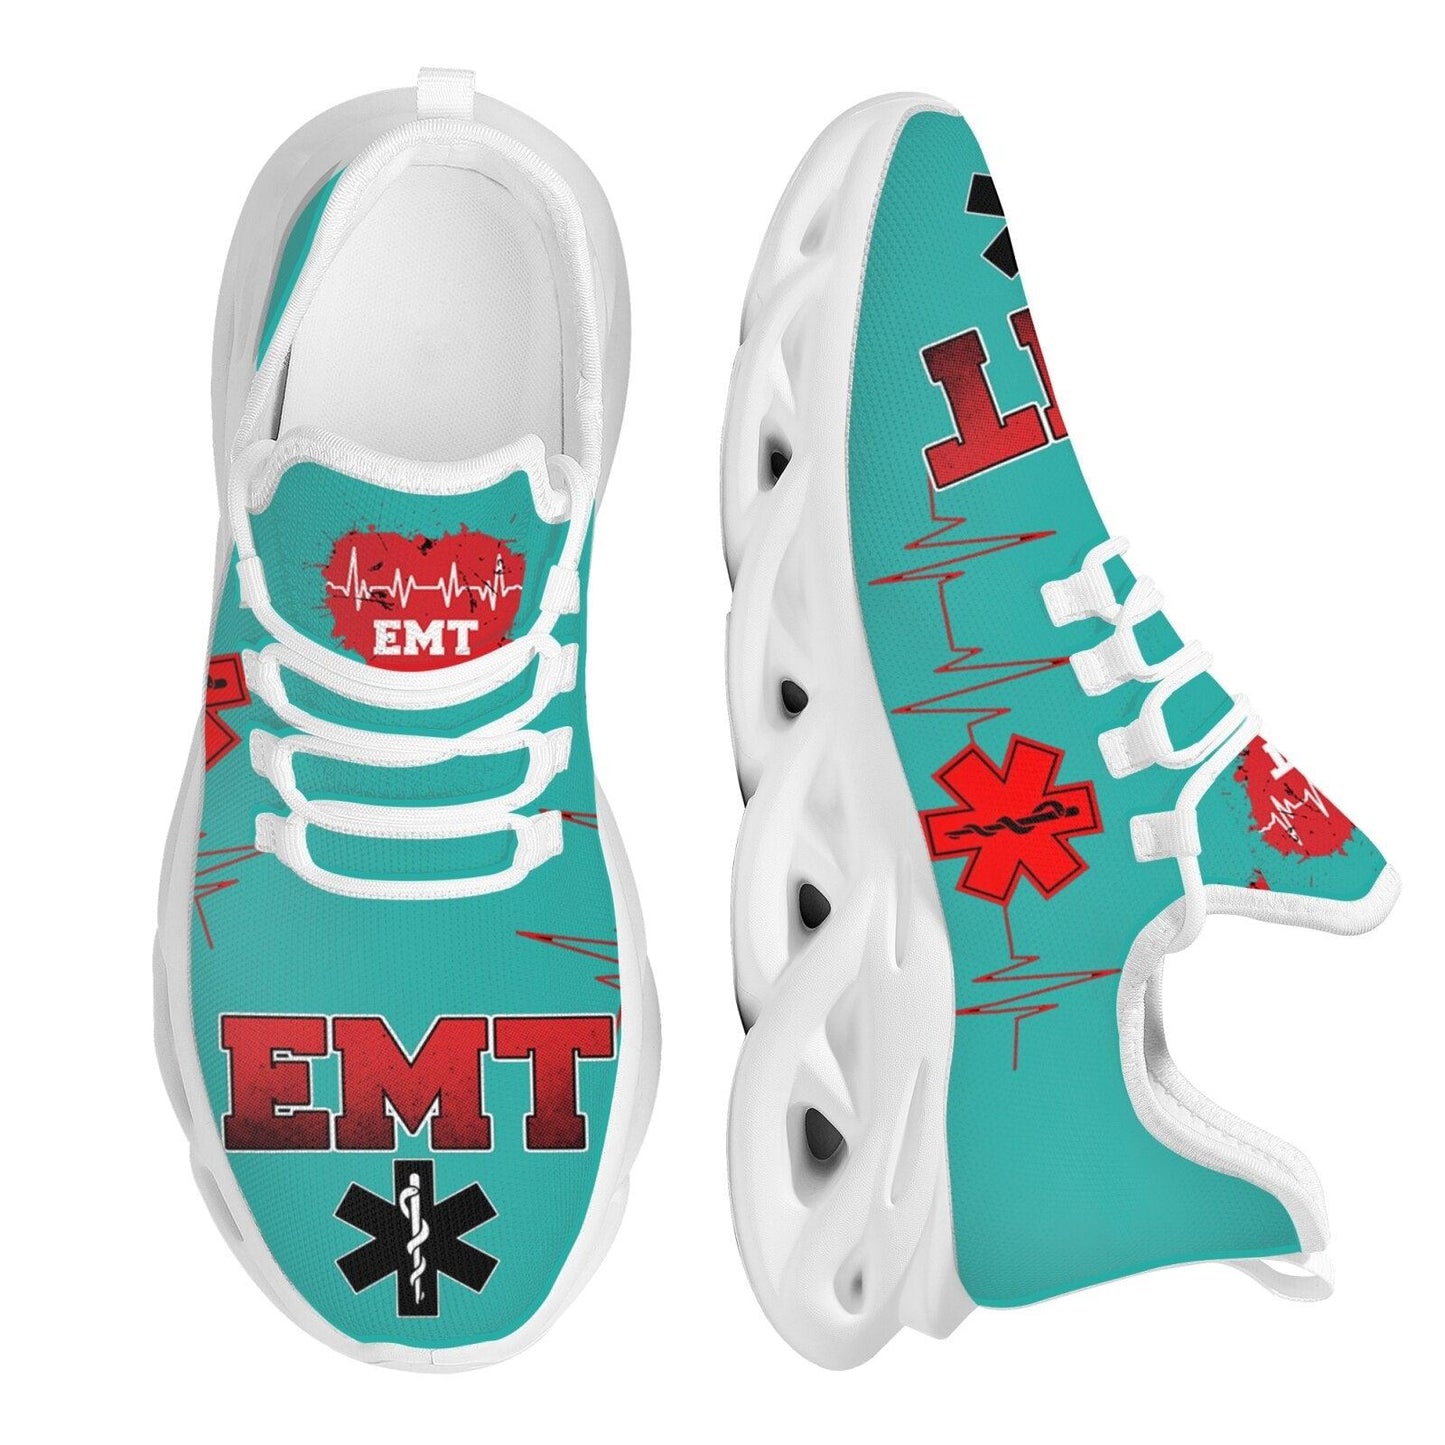 Paramedic EMT EMS Pattern Mesh Green Sneakers for Women Breathable Footwear